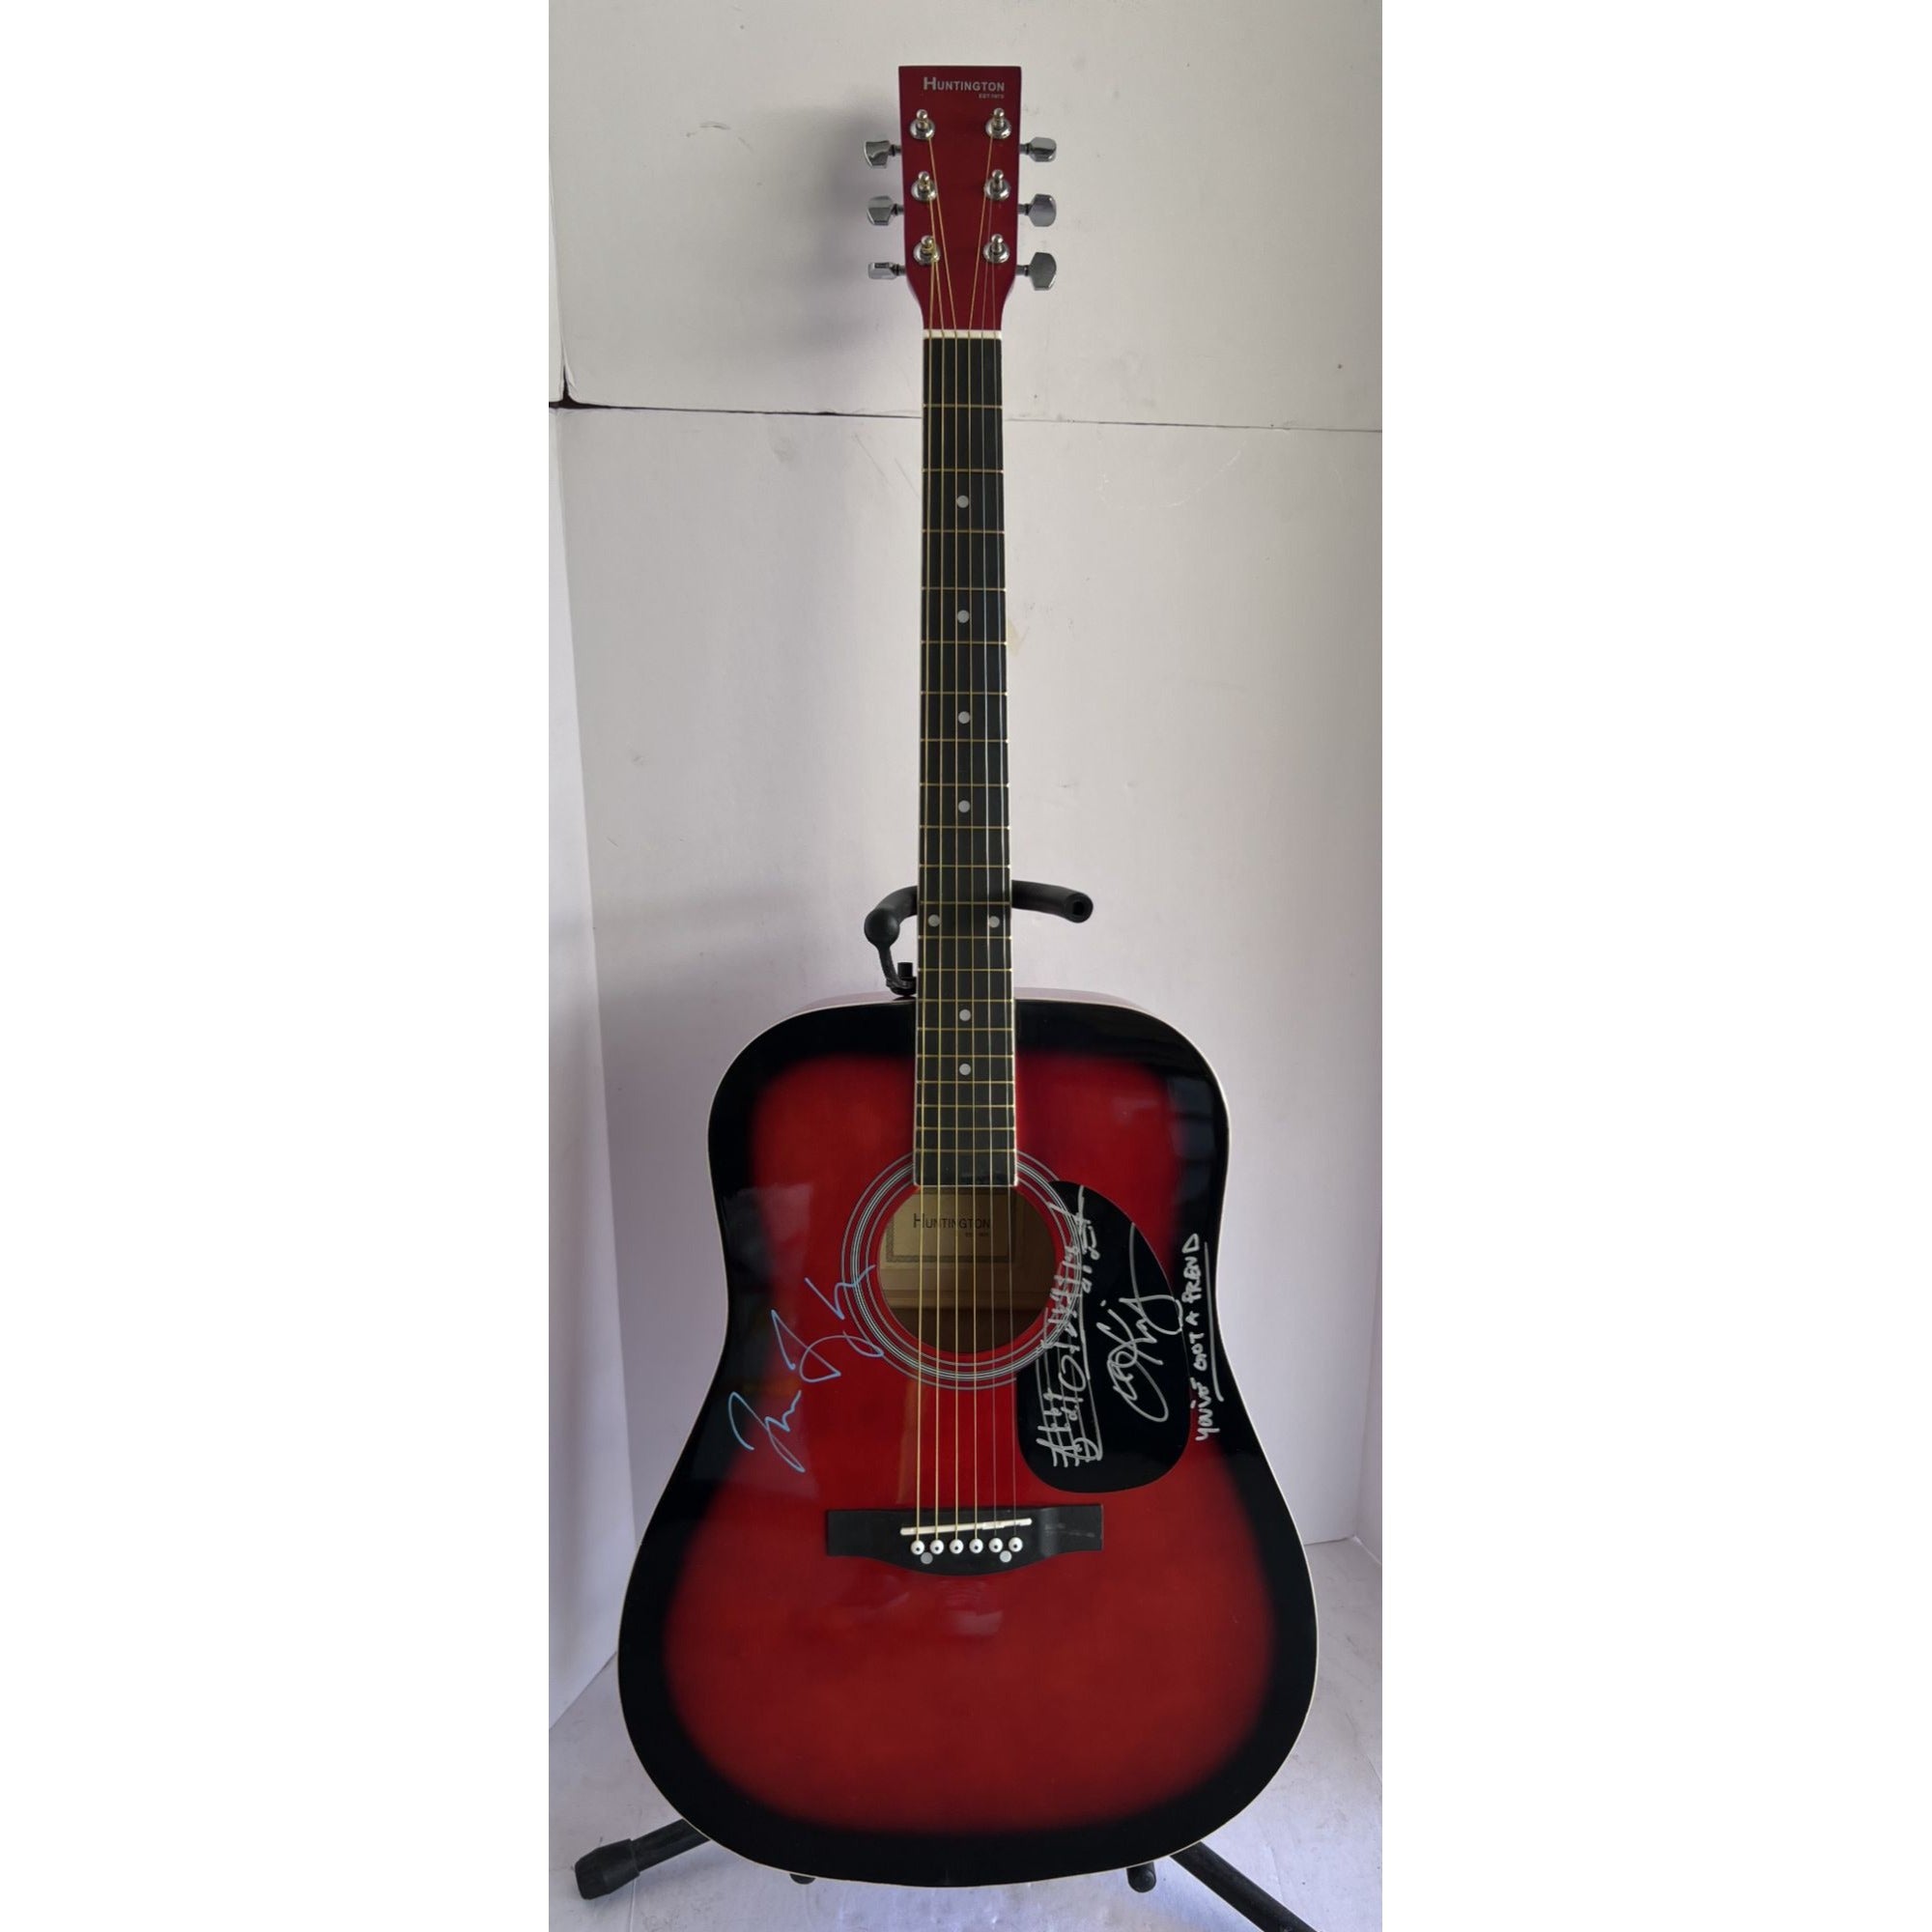 James Taylor and Carole King full size acoustic guitar signed with proof